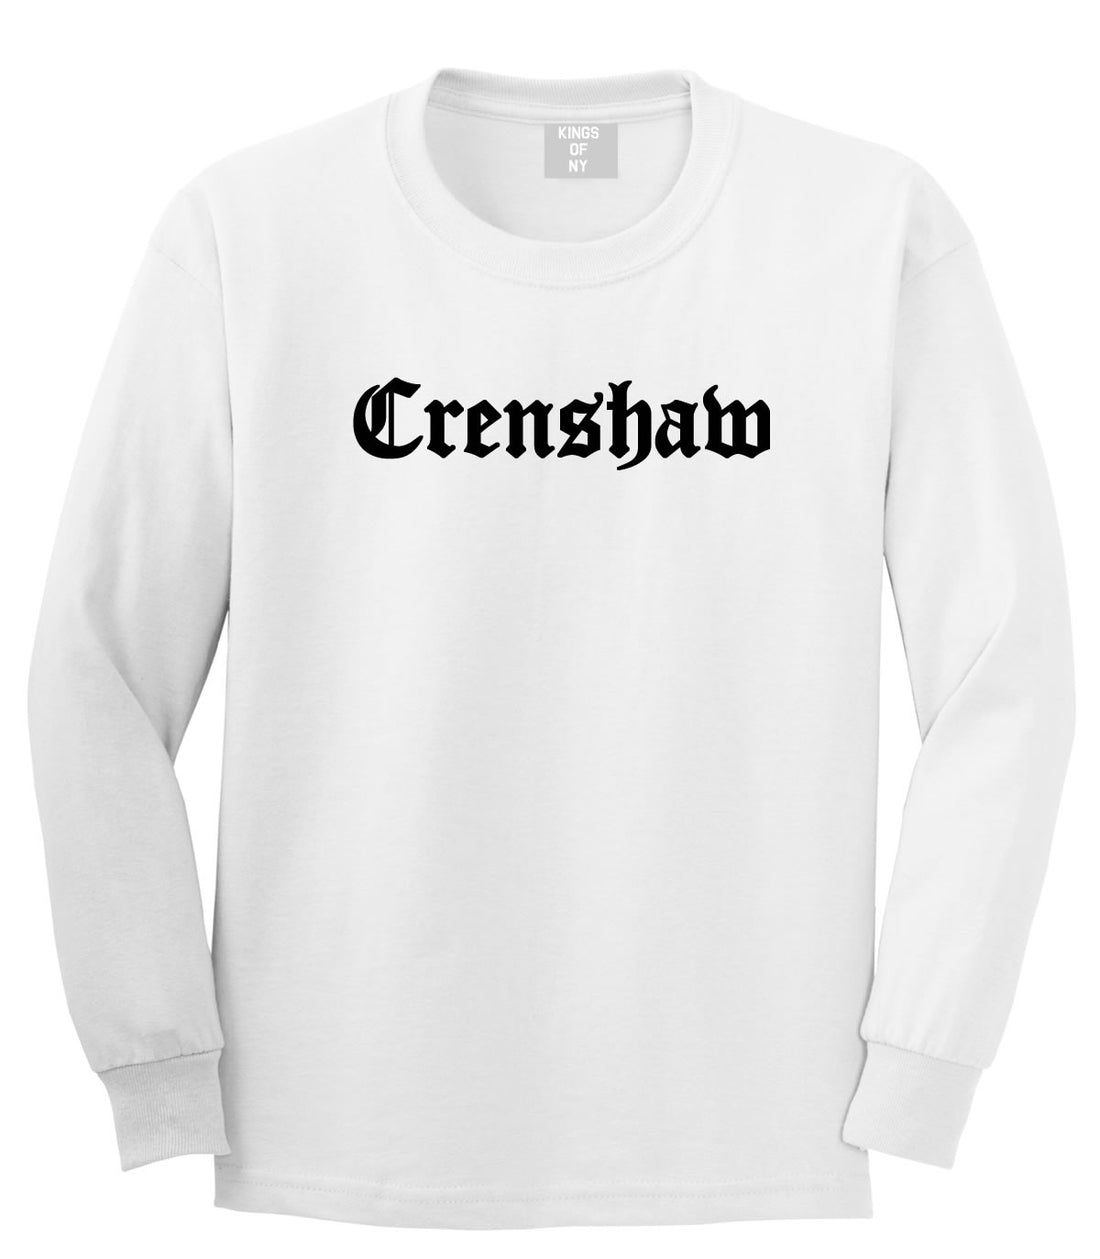 Crenshaw Old English California Long Sleeve T-Shirt in White By Kings Of NY